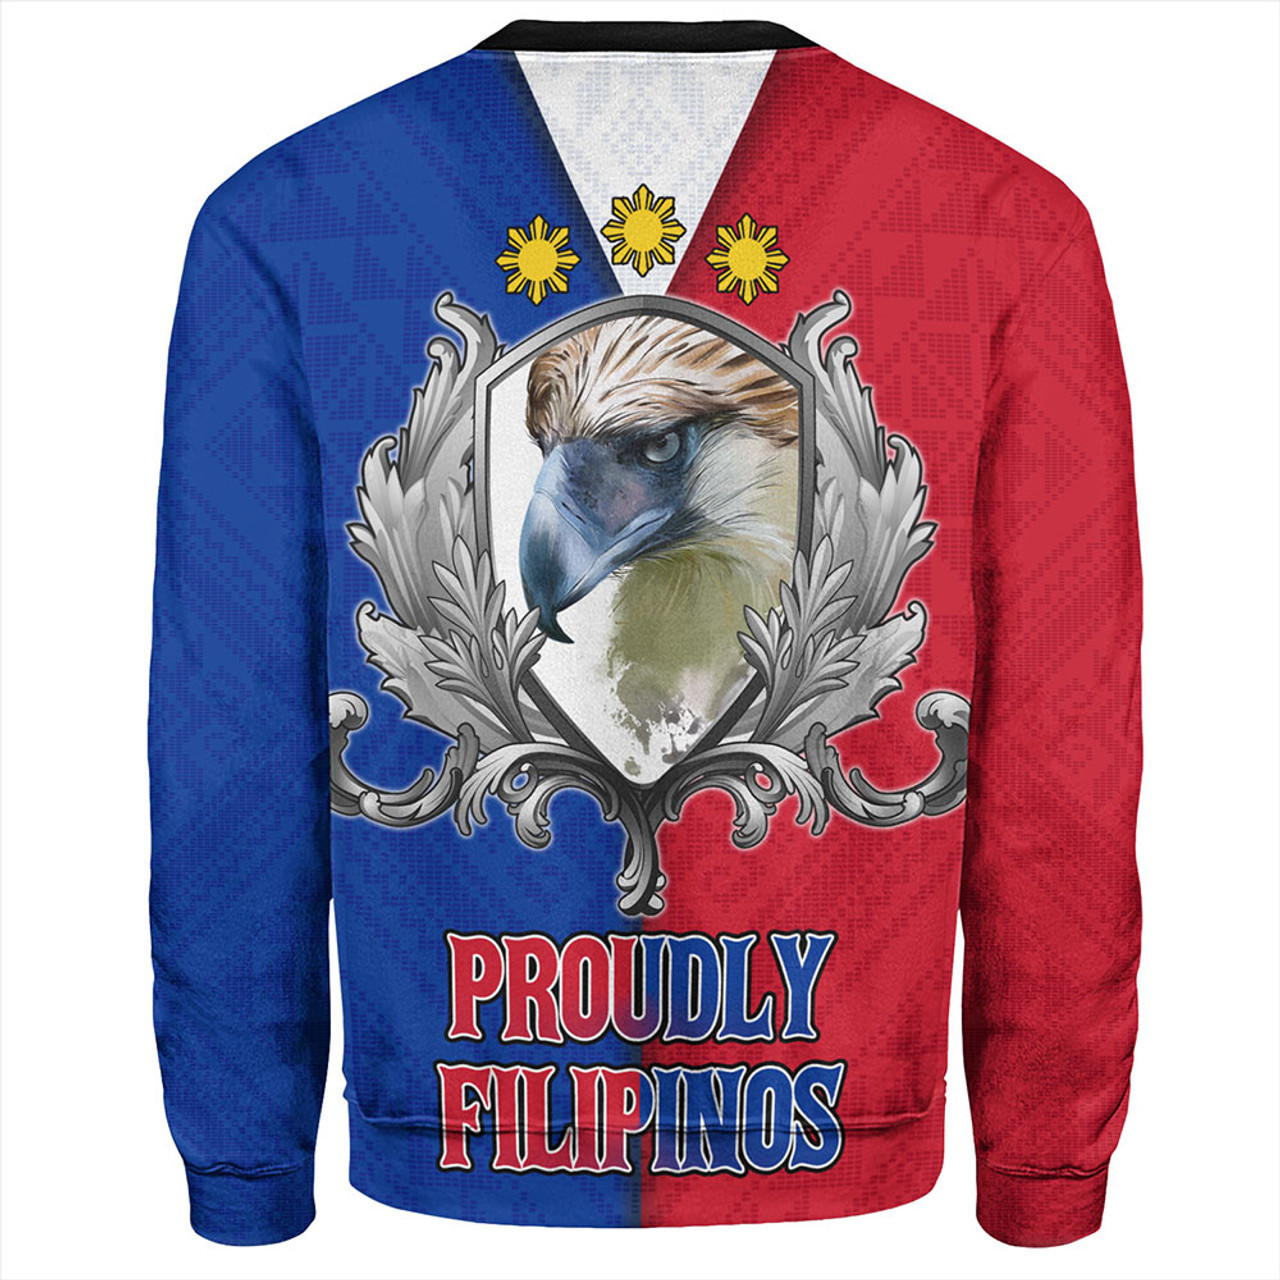 Philippines Filipinos Sweatshirt The Philippine Eagle With Traditional Patterns